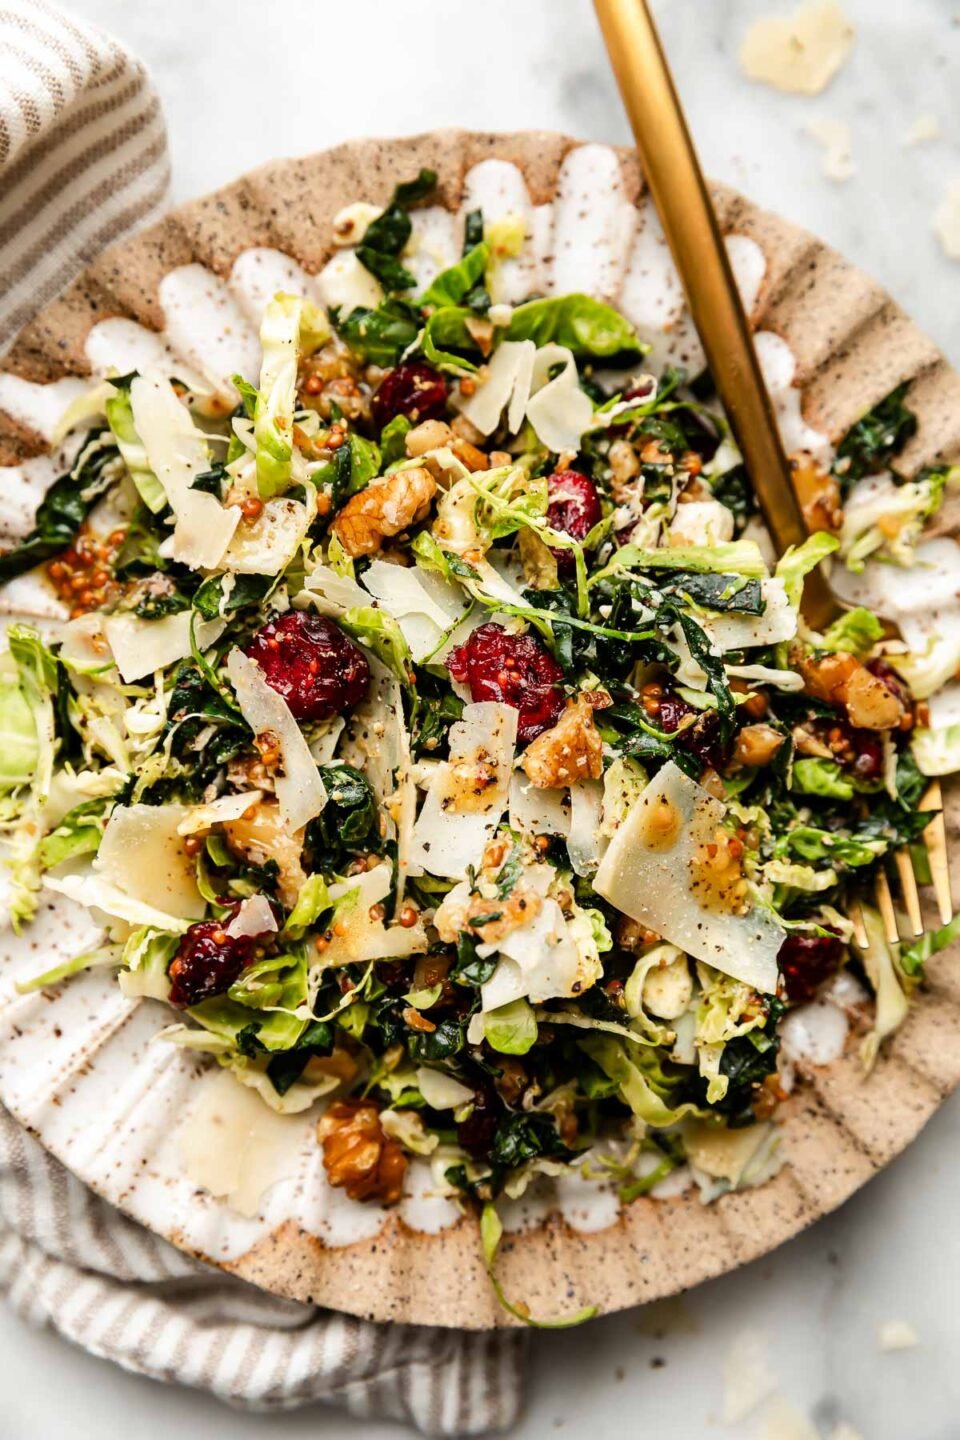 An overhead shot of a serving of kale and brussels sprouts salad topped with parmesan and black pepper on a scalloped brown and white plate atop a white surface. A striped cloth sits alongside the plate.